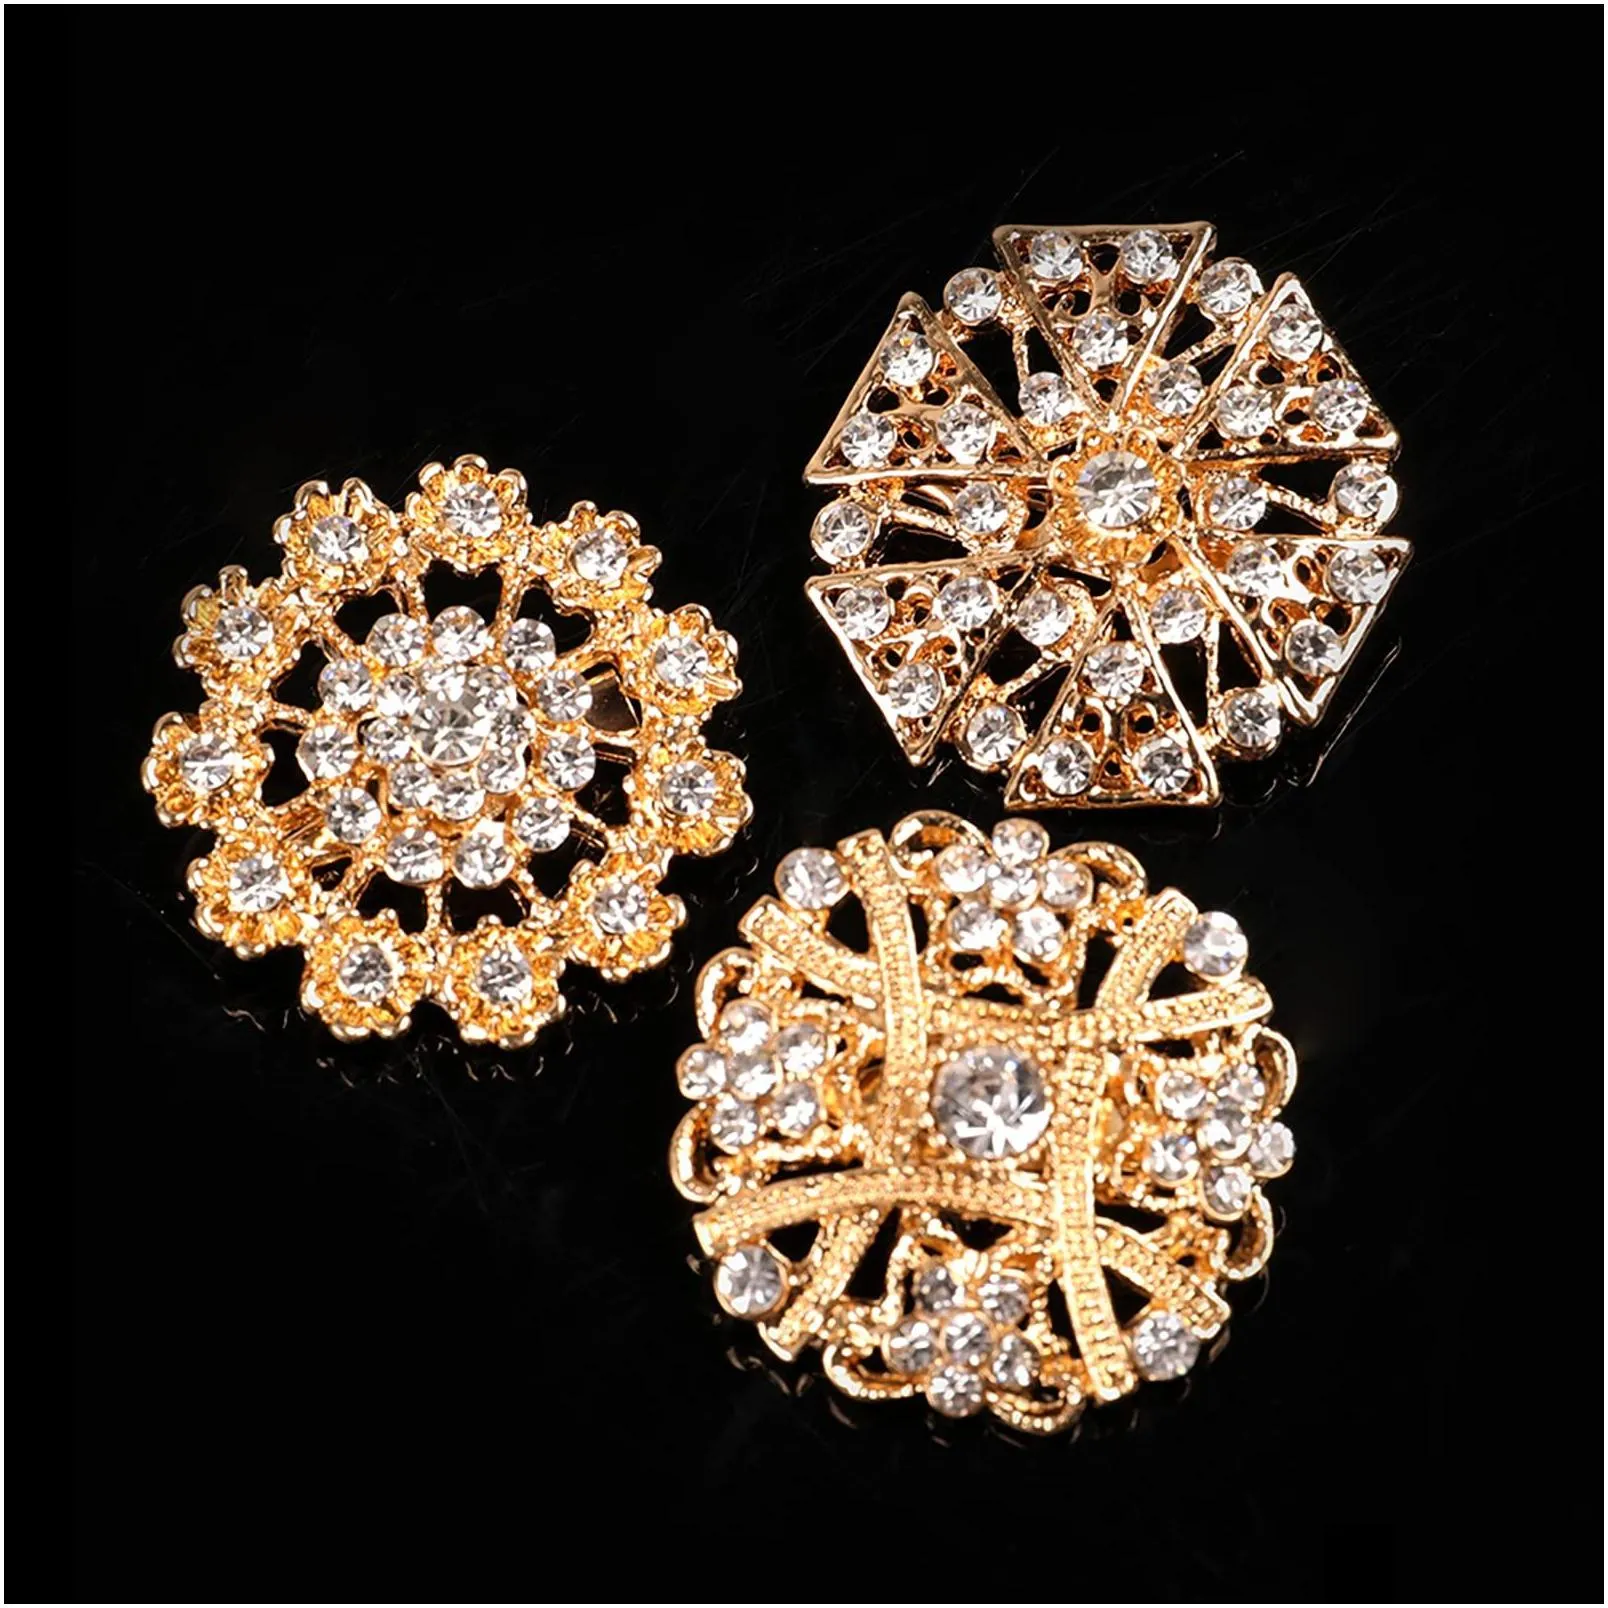 Pins Brooches Mixed Rhinestone Crystal Brooch Alloy Gold Vintage Assorted Set For Wedding Bouquet Party Gift Craft Diy Drop Delivery